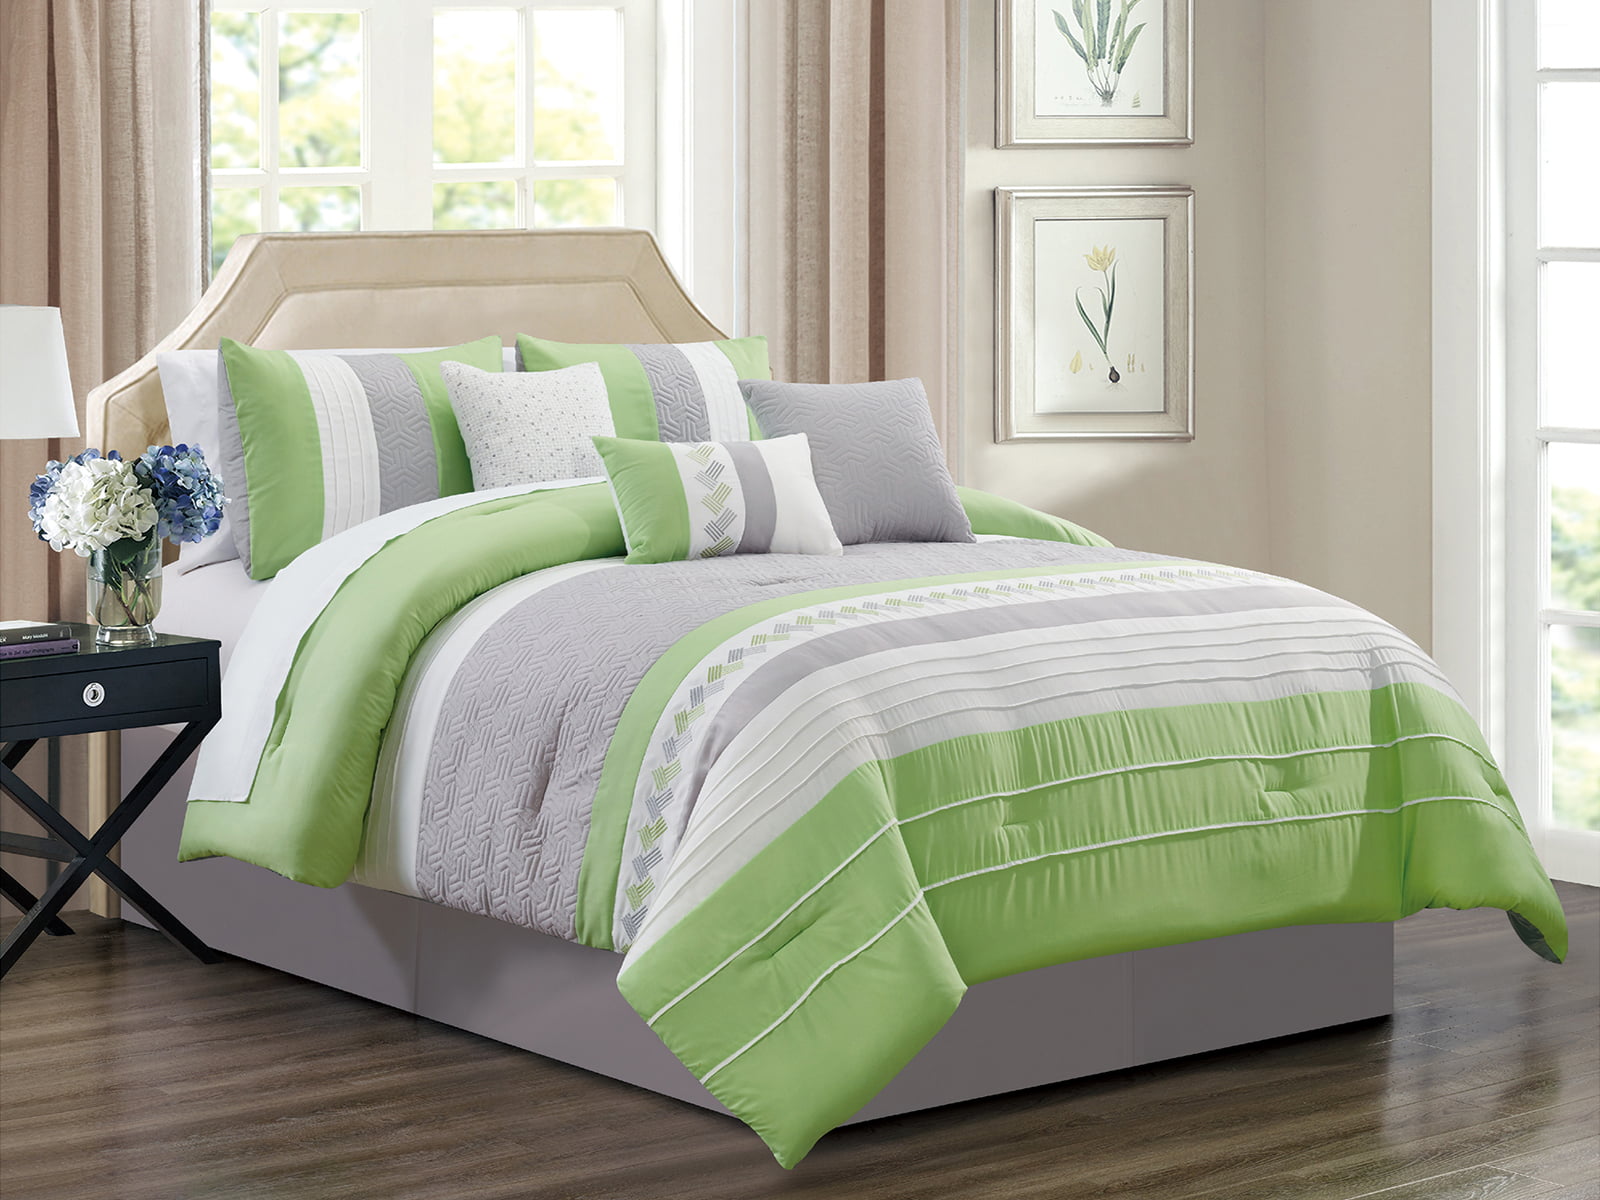 7 Pc Knoton Geometric Cube Lines Comforter Set Lime Green Gray Off White Queen Sfhs Org